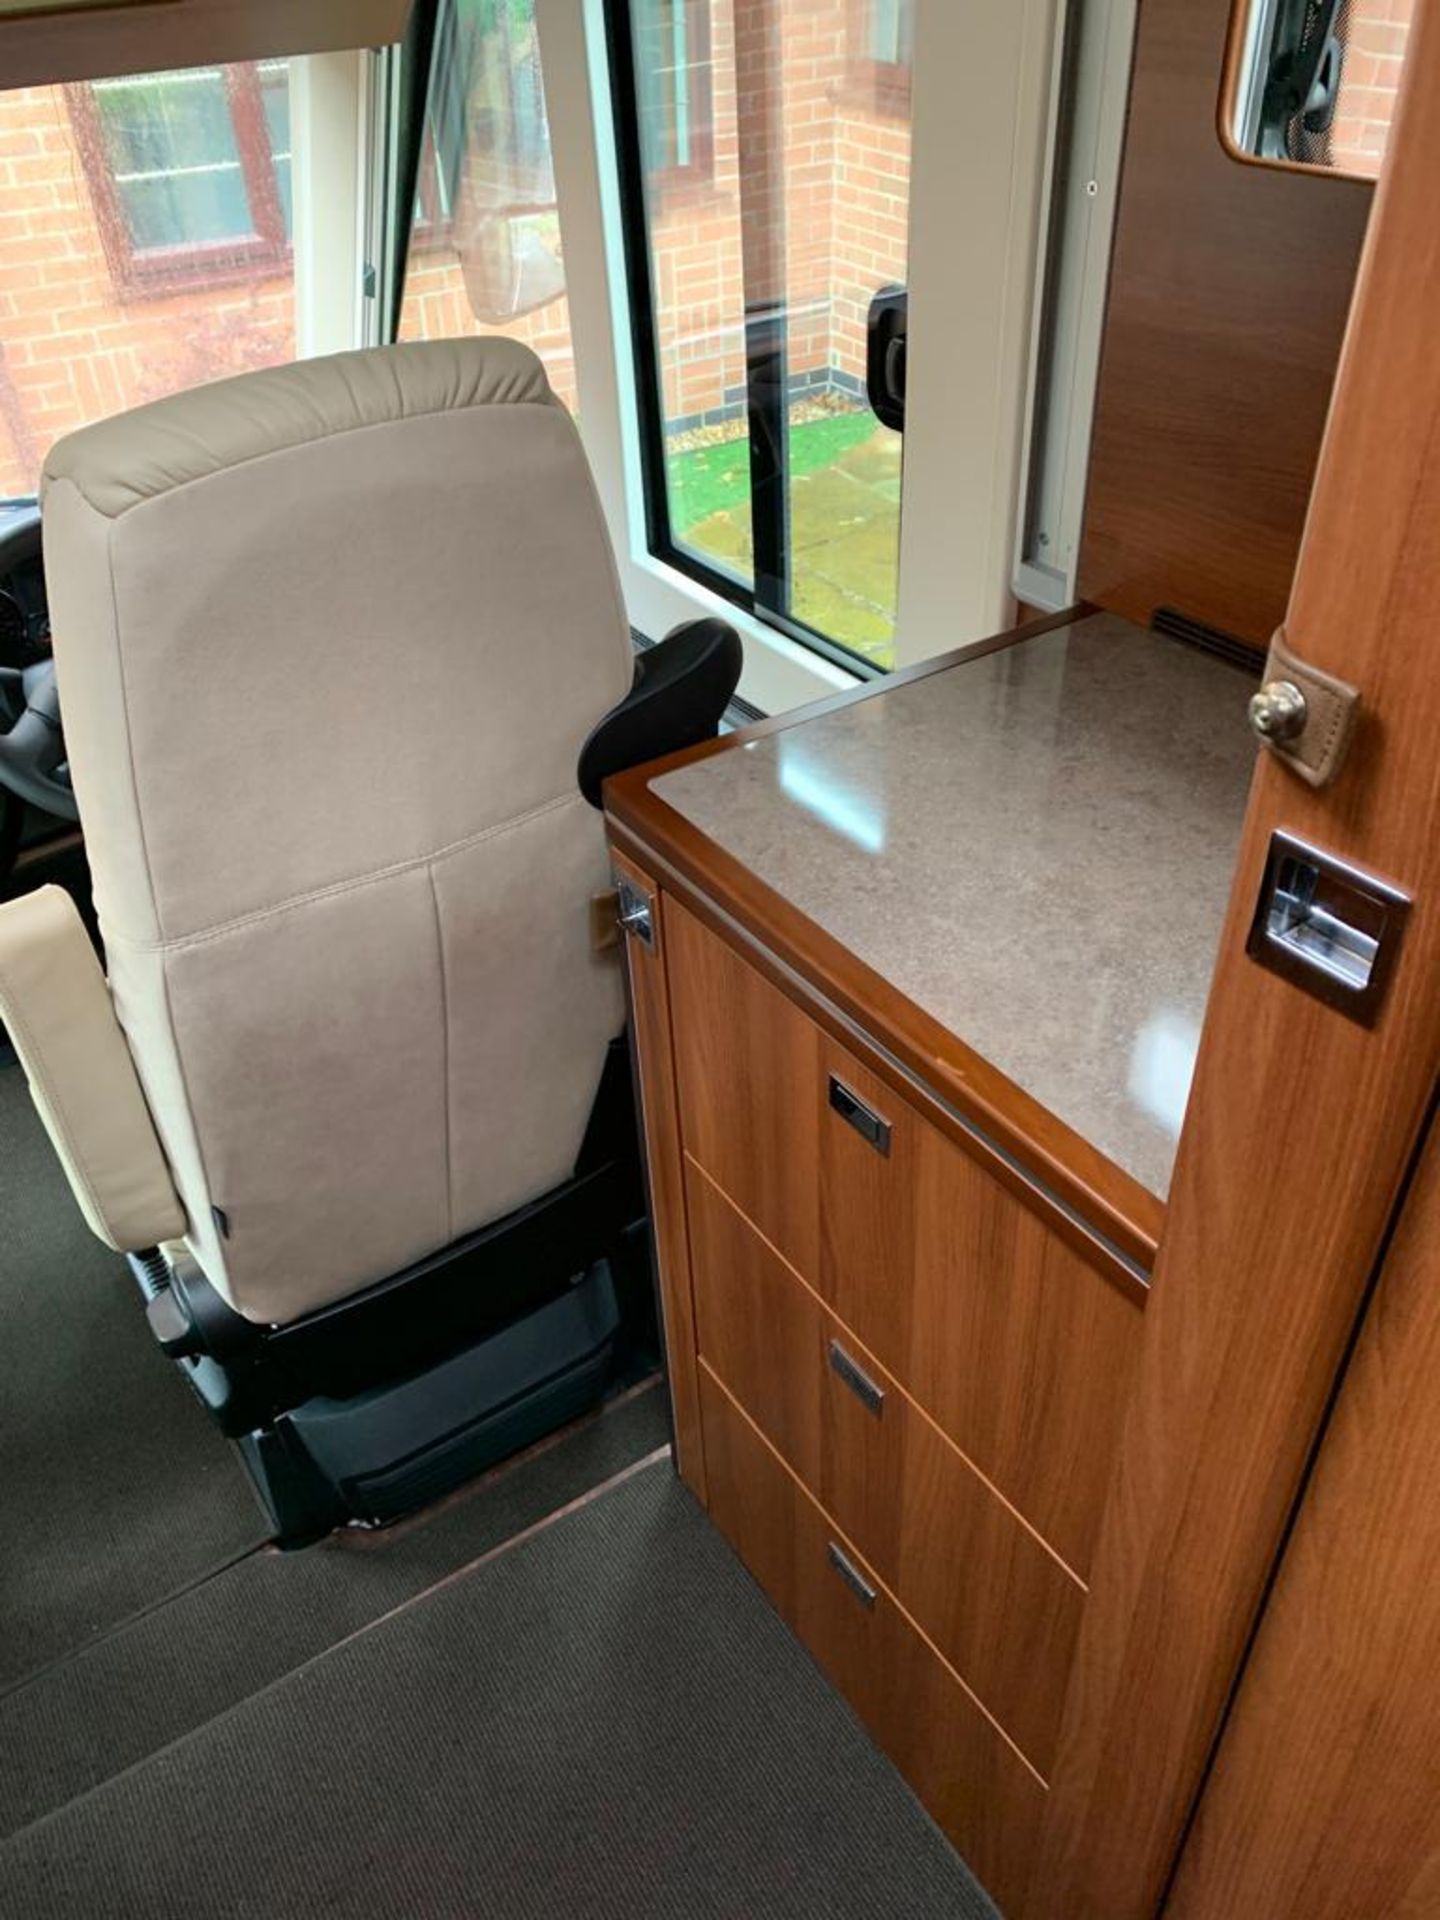 2020 CARTHAGO LINER-FOR-TWO 53L MOTORHOME 11 mths WARRANTY 4529 MILES, MINT CONDITION NO VAT - Image 34 of 38